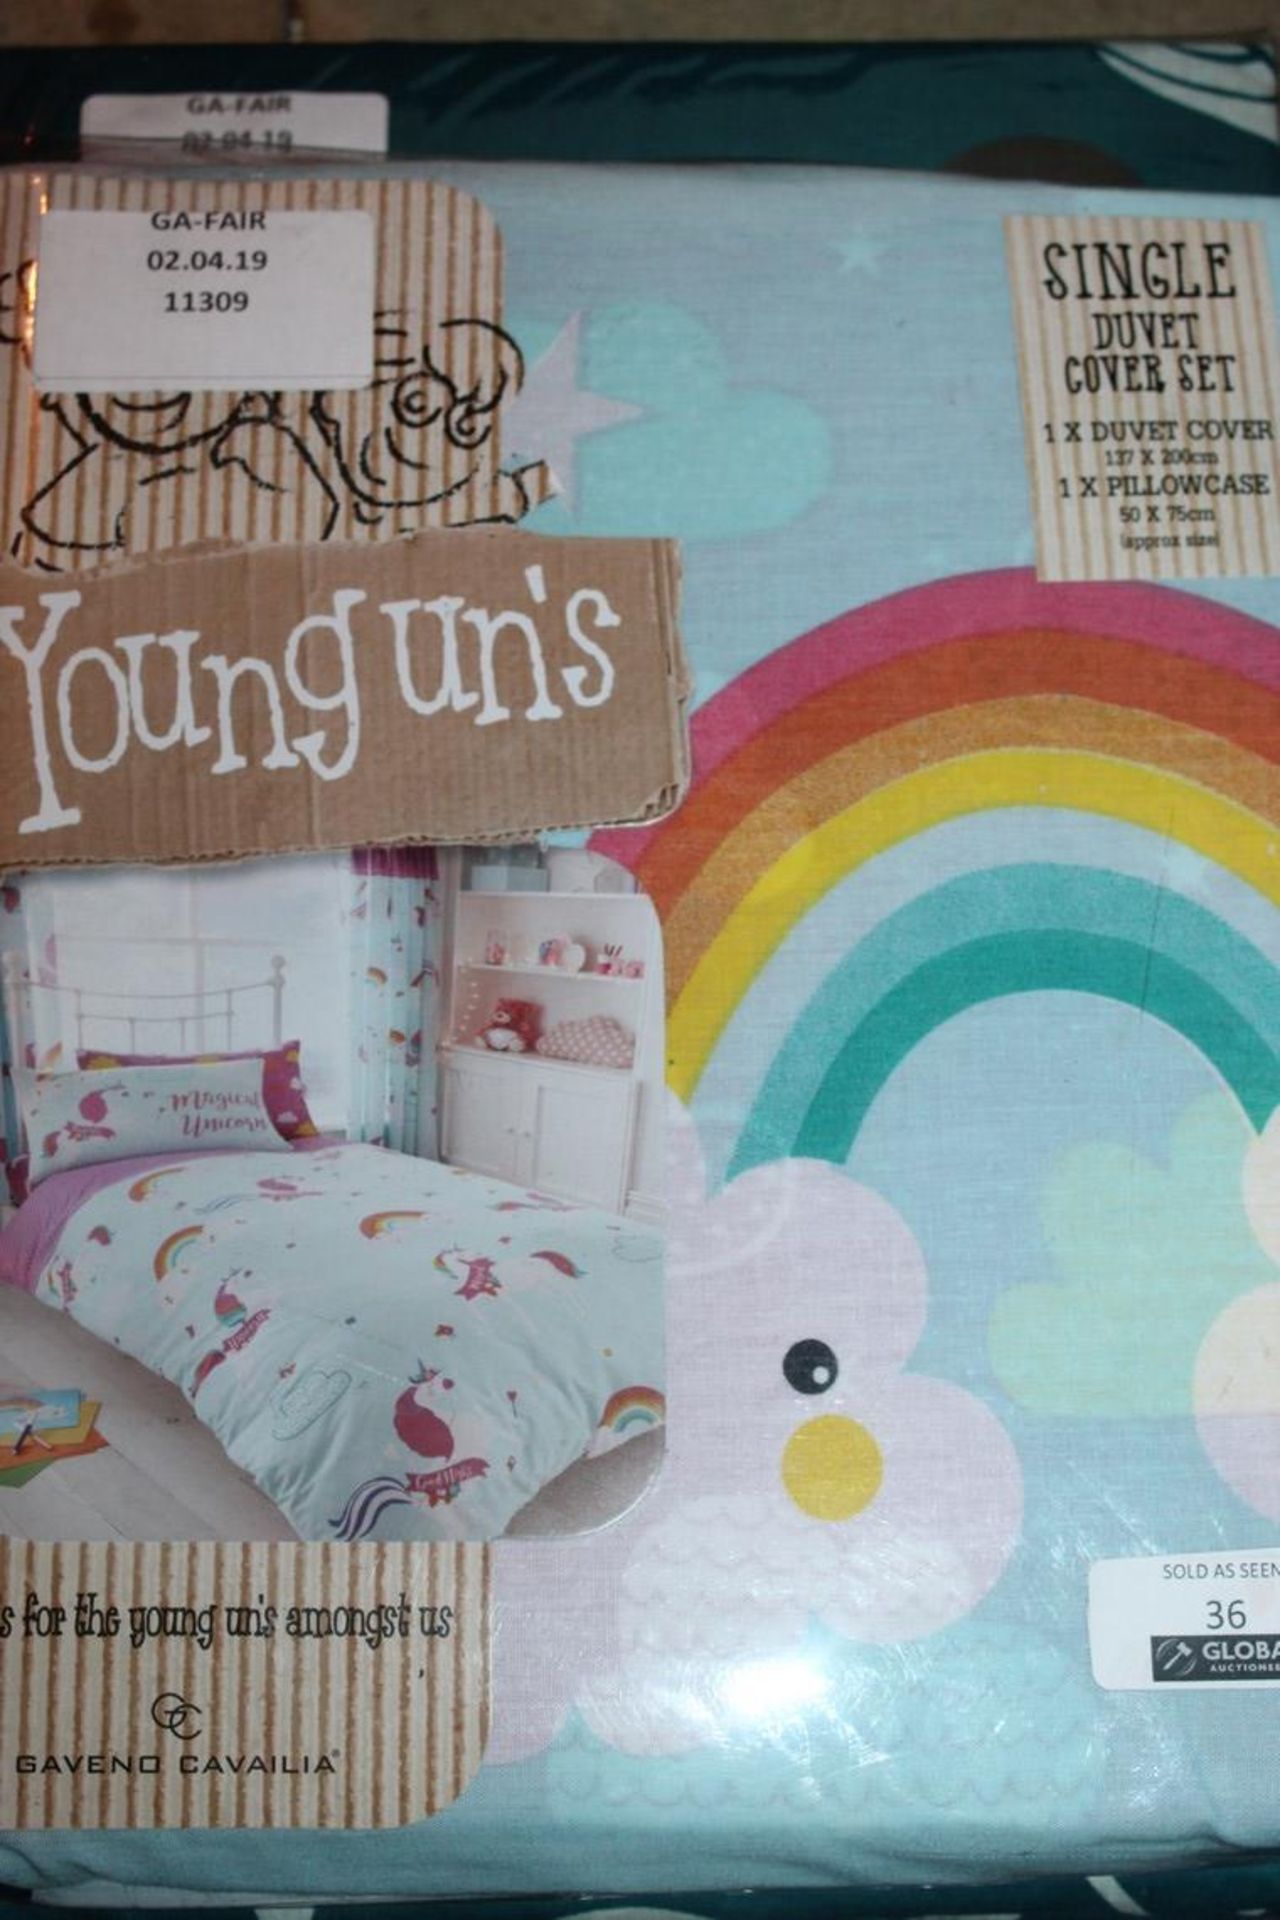 Lot to Contain 3 Assorted Items to Include a Younguns Unicorn Single Duvet Cover Set, Gaveno